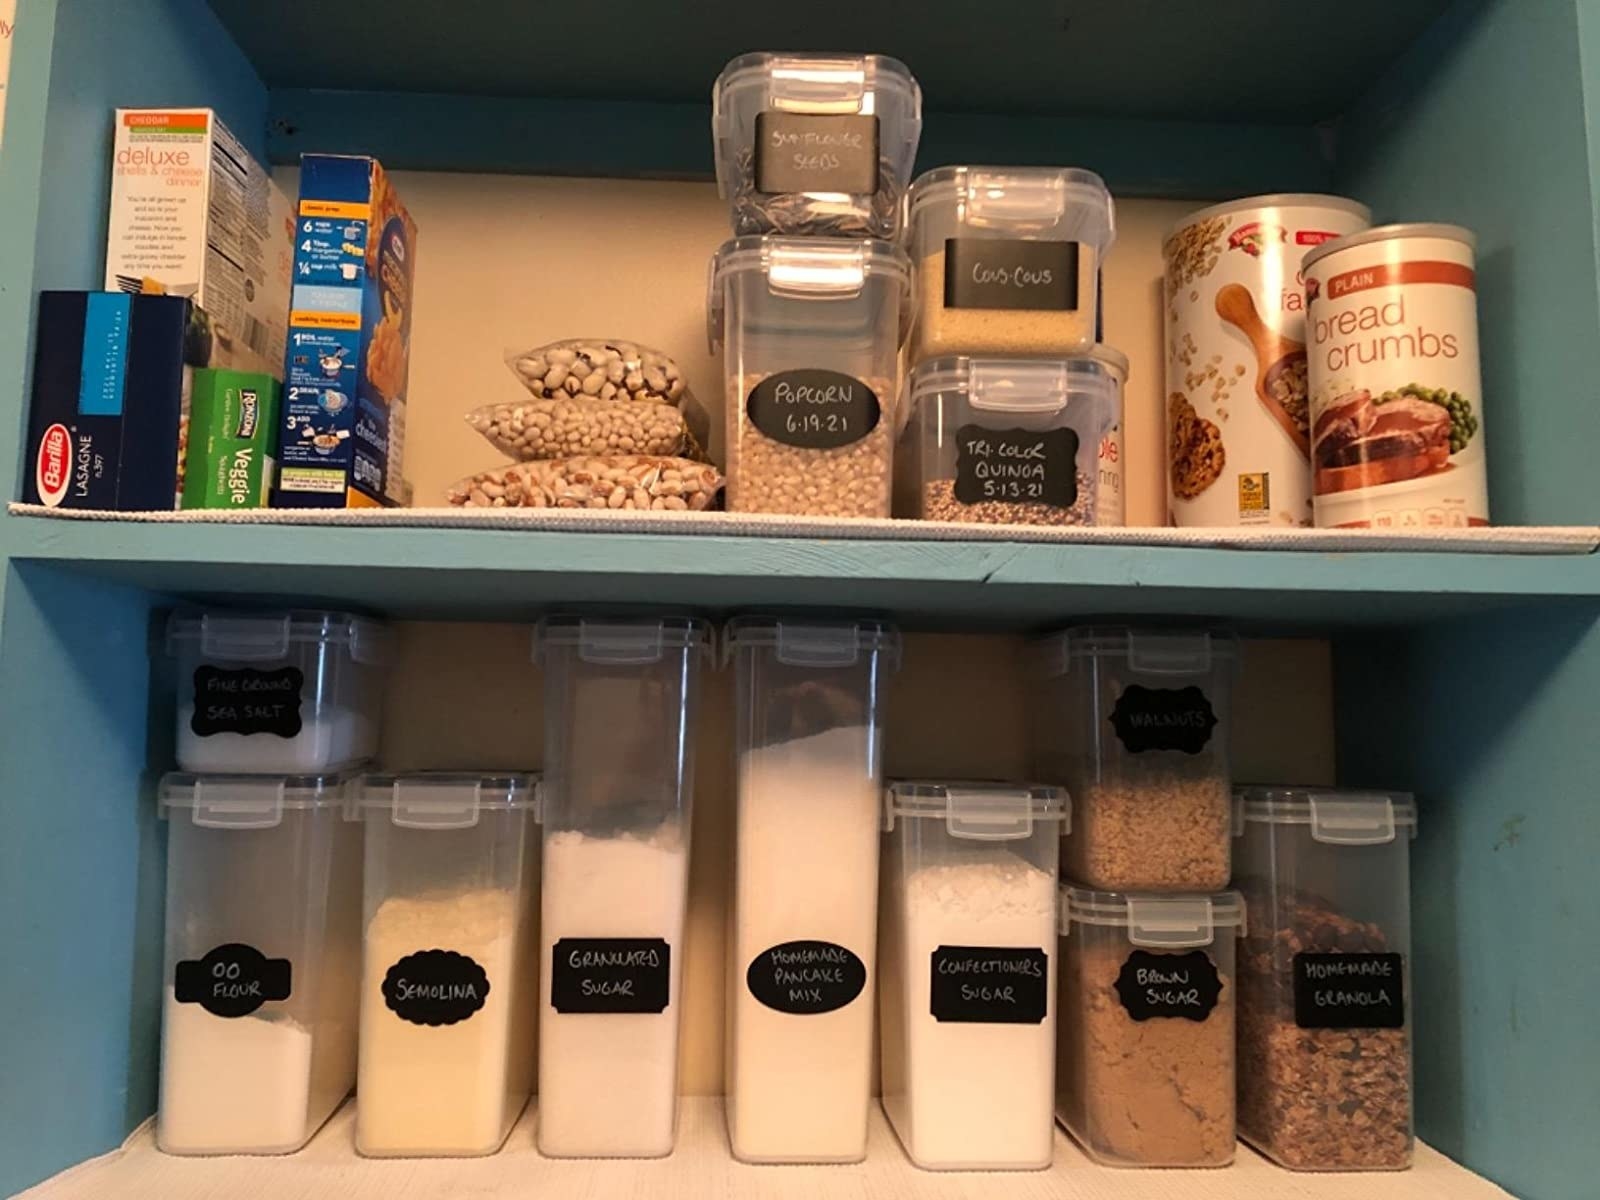 Airtight Food Storage Containers With Lids, Plastic Bpa Free Kitchen Pantry  Organization And Storage, Dry Food Canisters For Cereal,pasta,flour,sugar,  With Lables, Marker, Dishwasher Safe, Plastic Food Preservation Tank, Home  Kitchen Supplies 